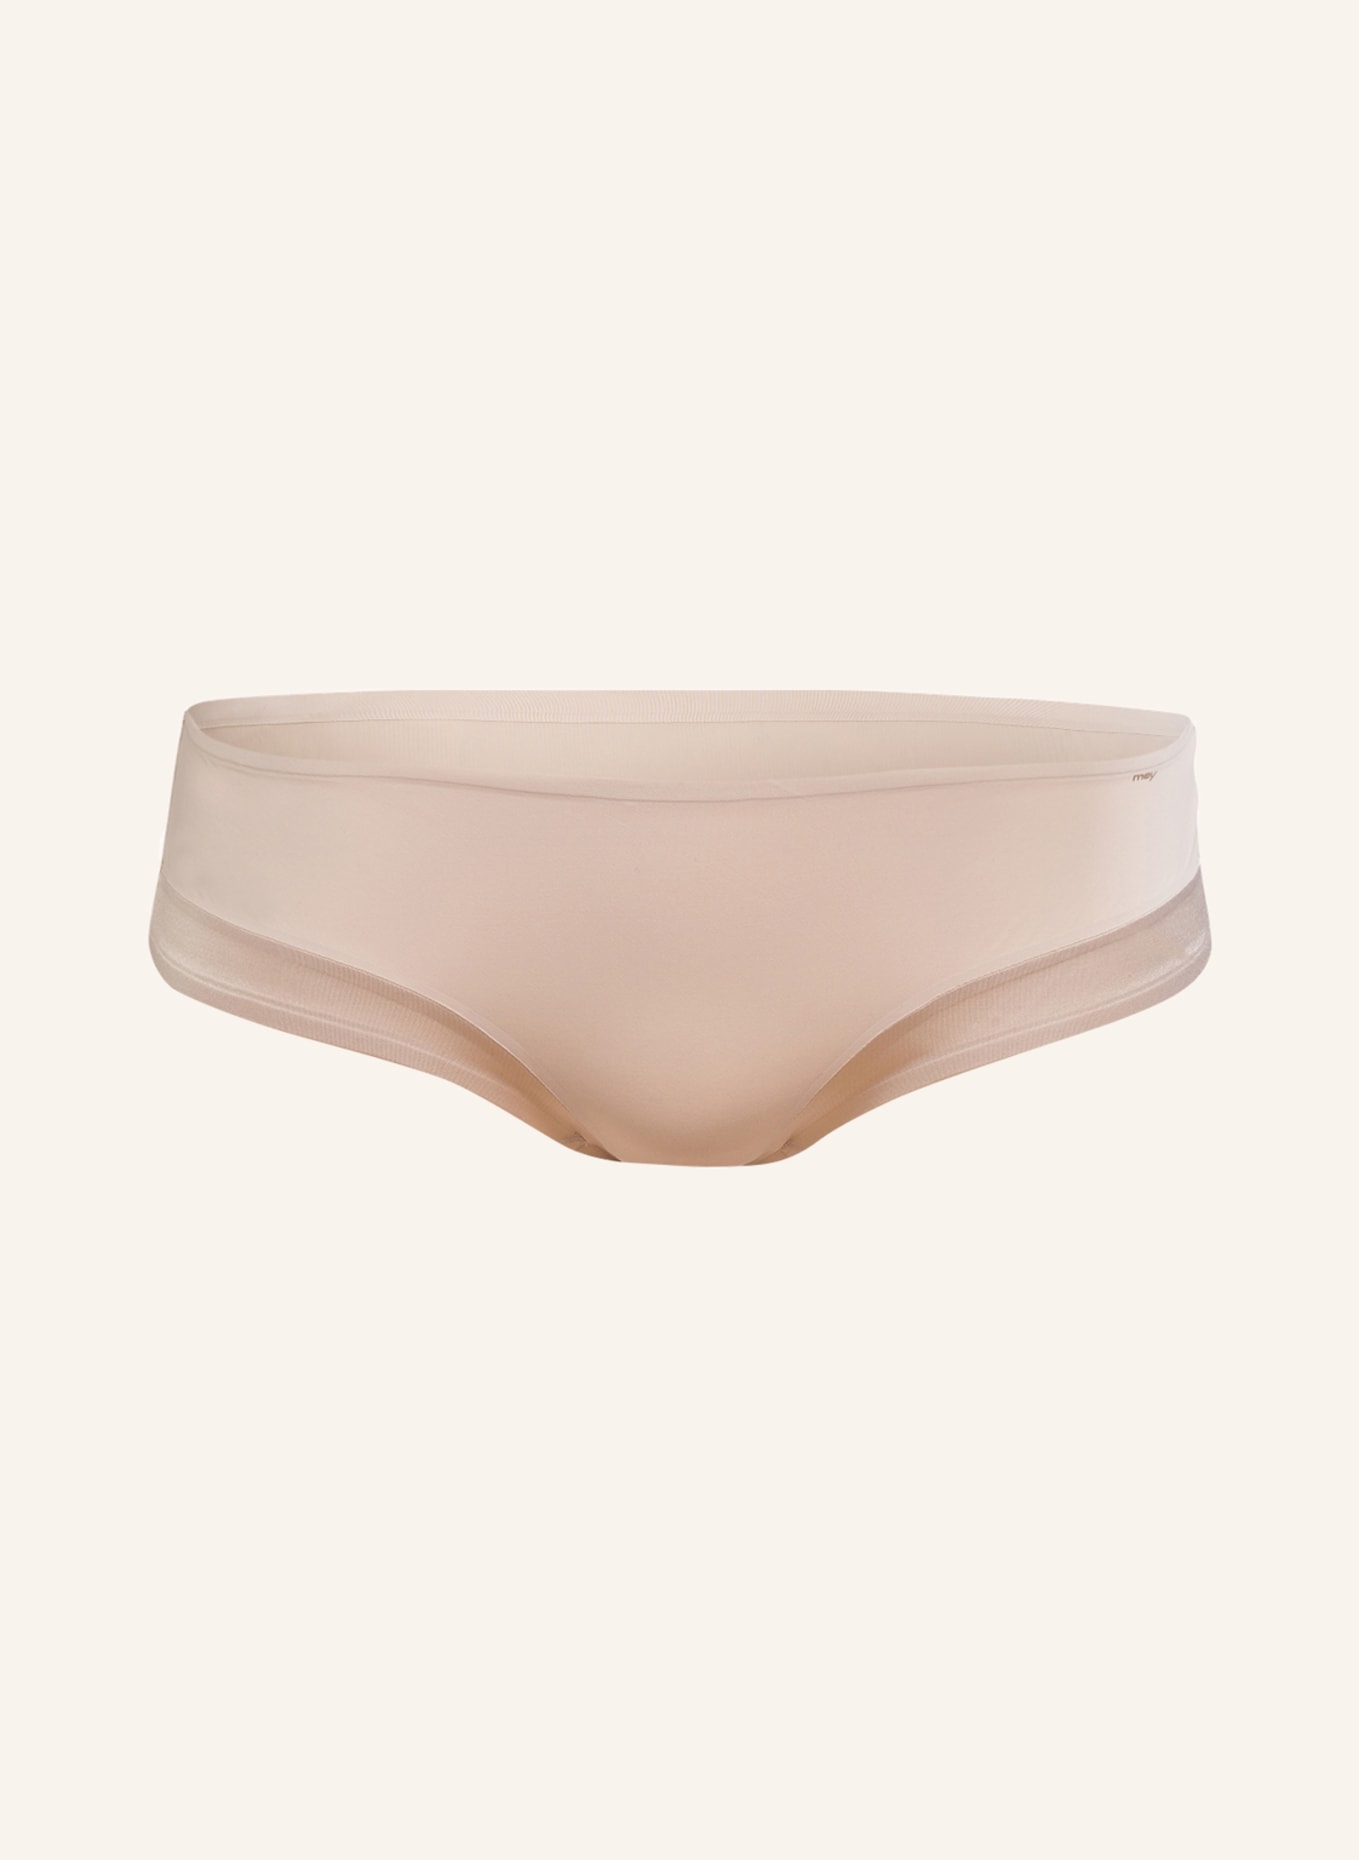 mey Panty series GLORIOUS, Color: BEIGE (Image 1)